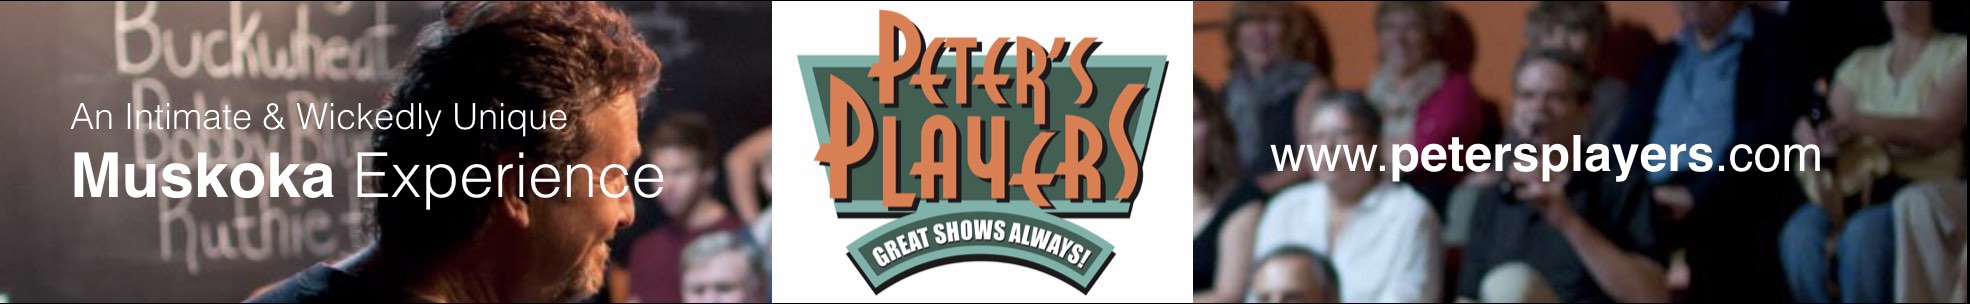 Peters Players Ad